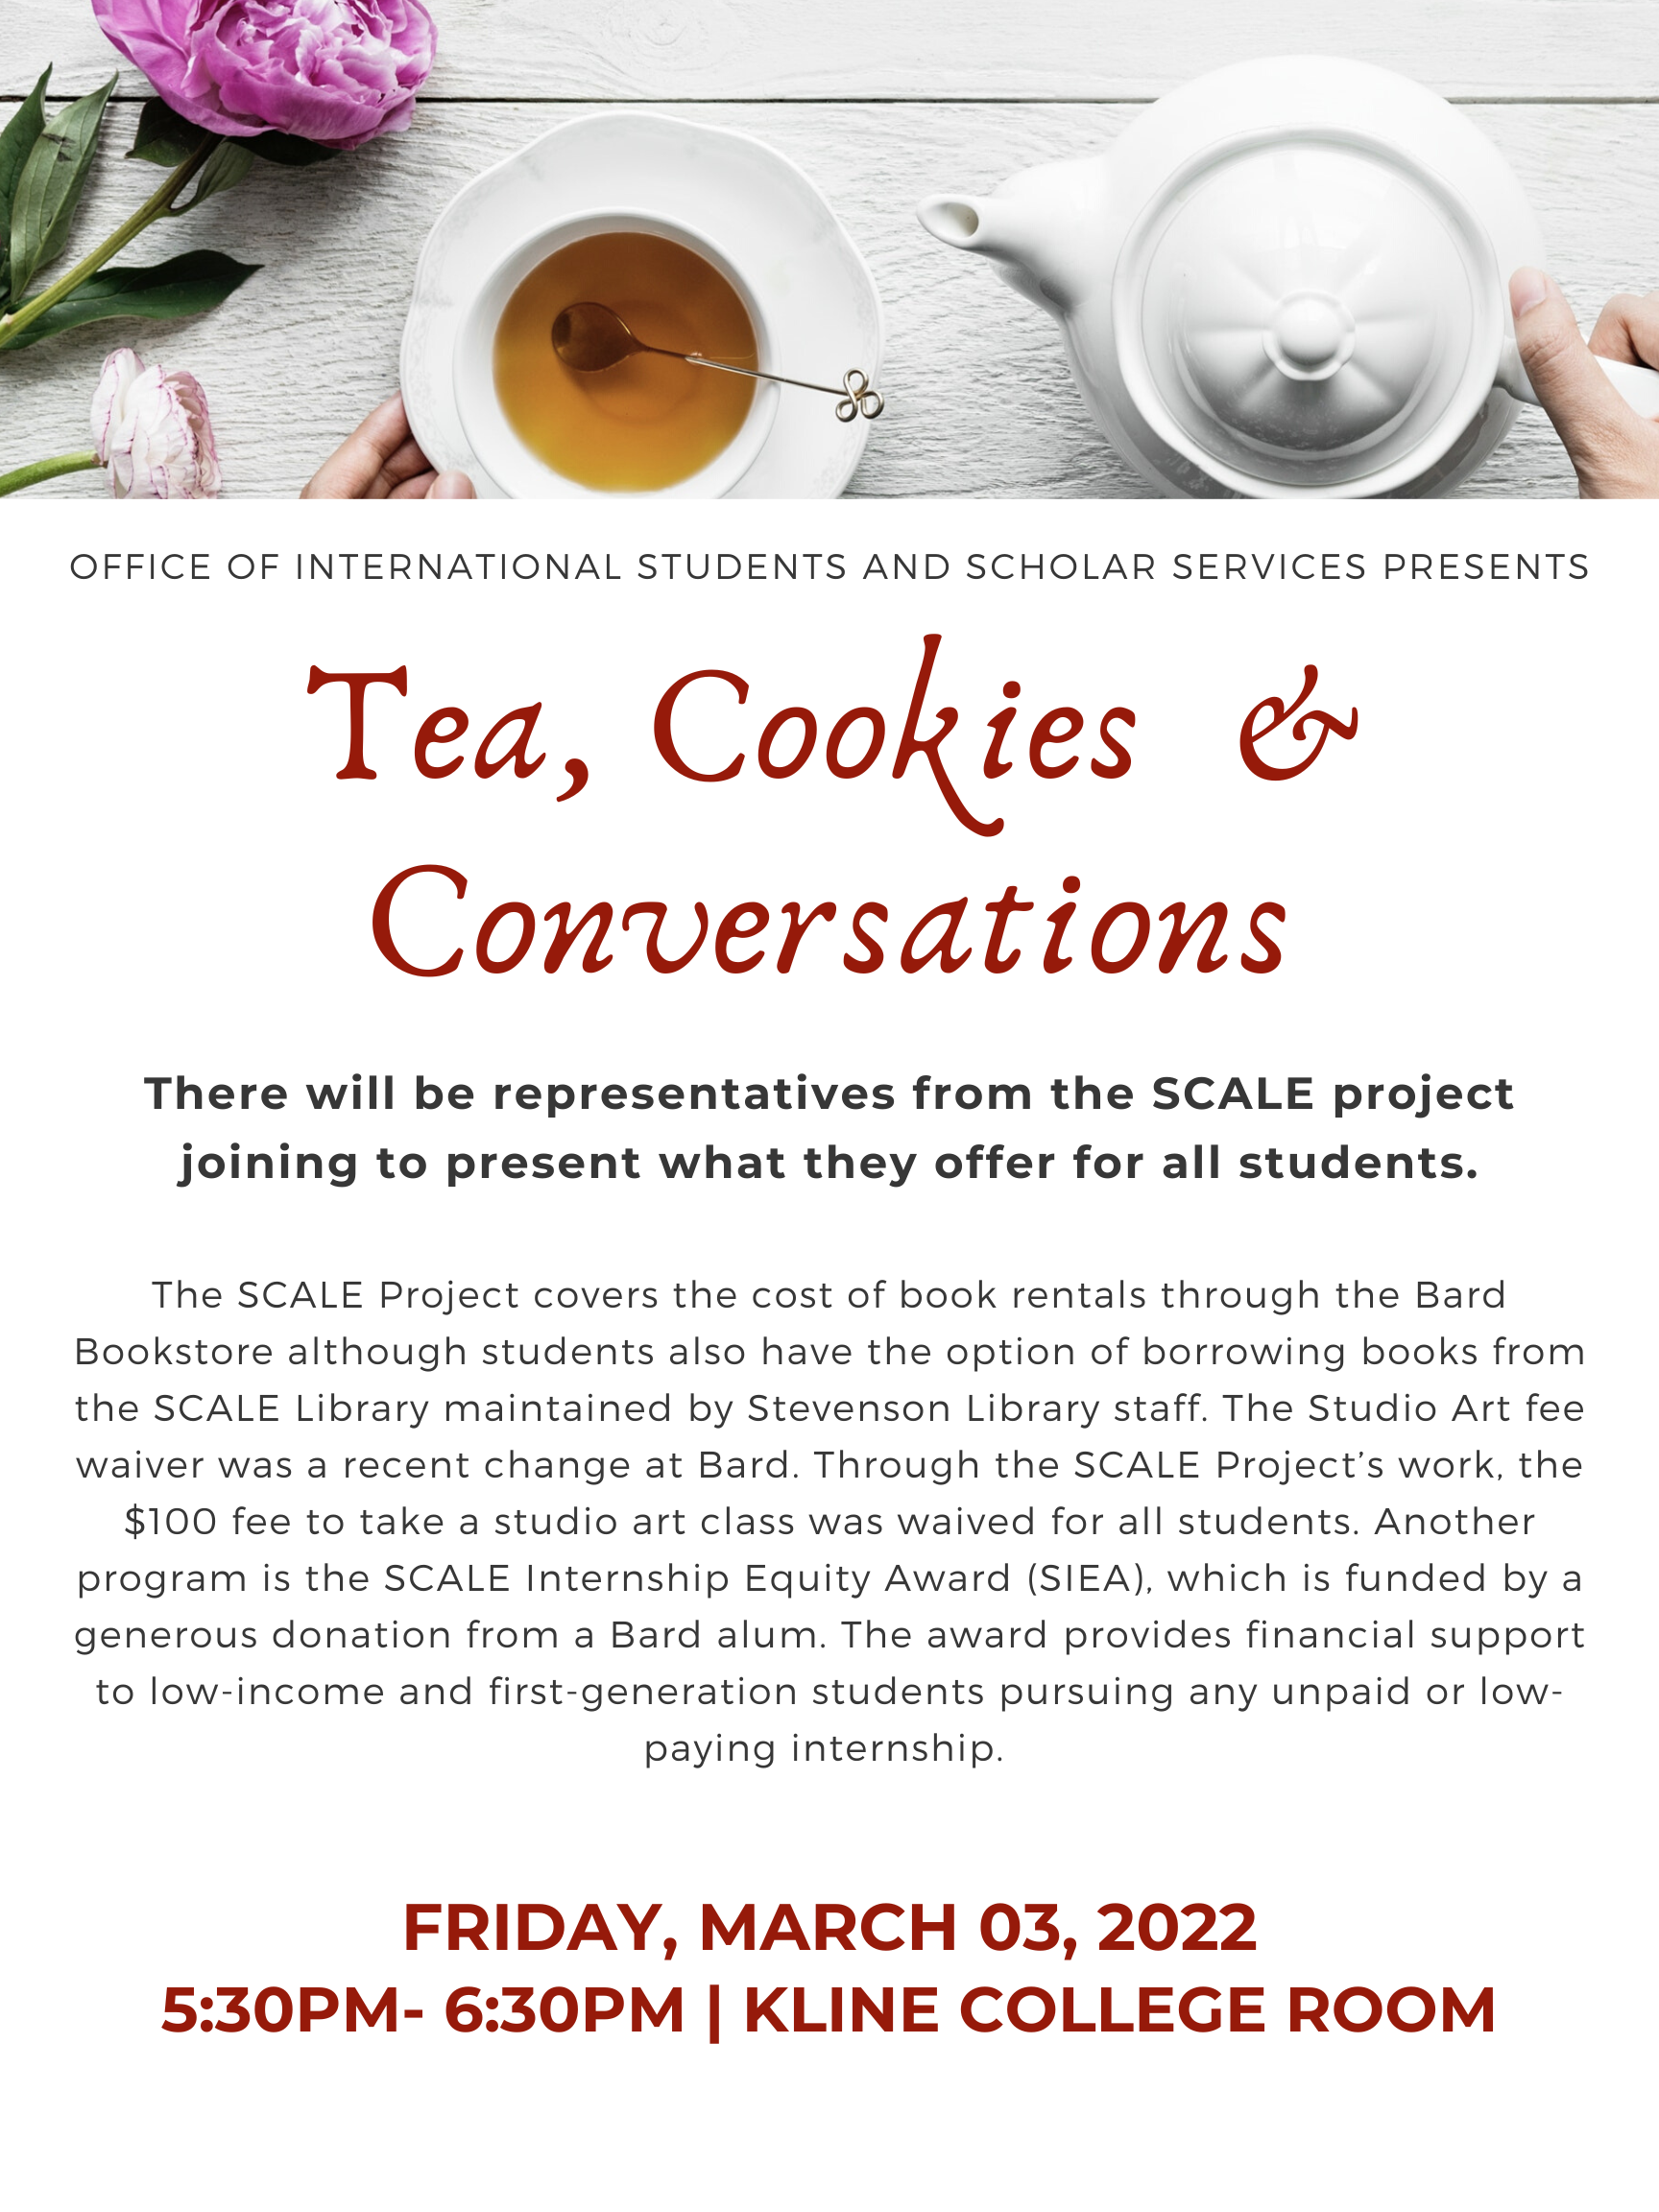 Tea, Cookies, and Conversations for International Students